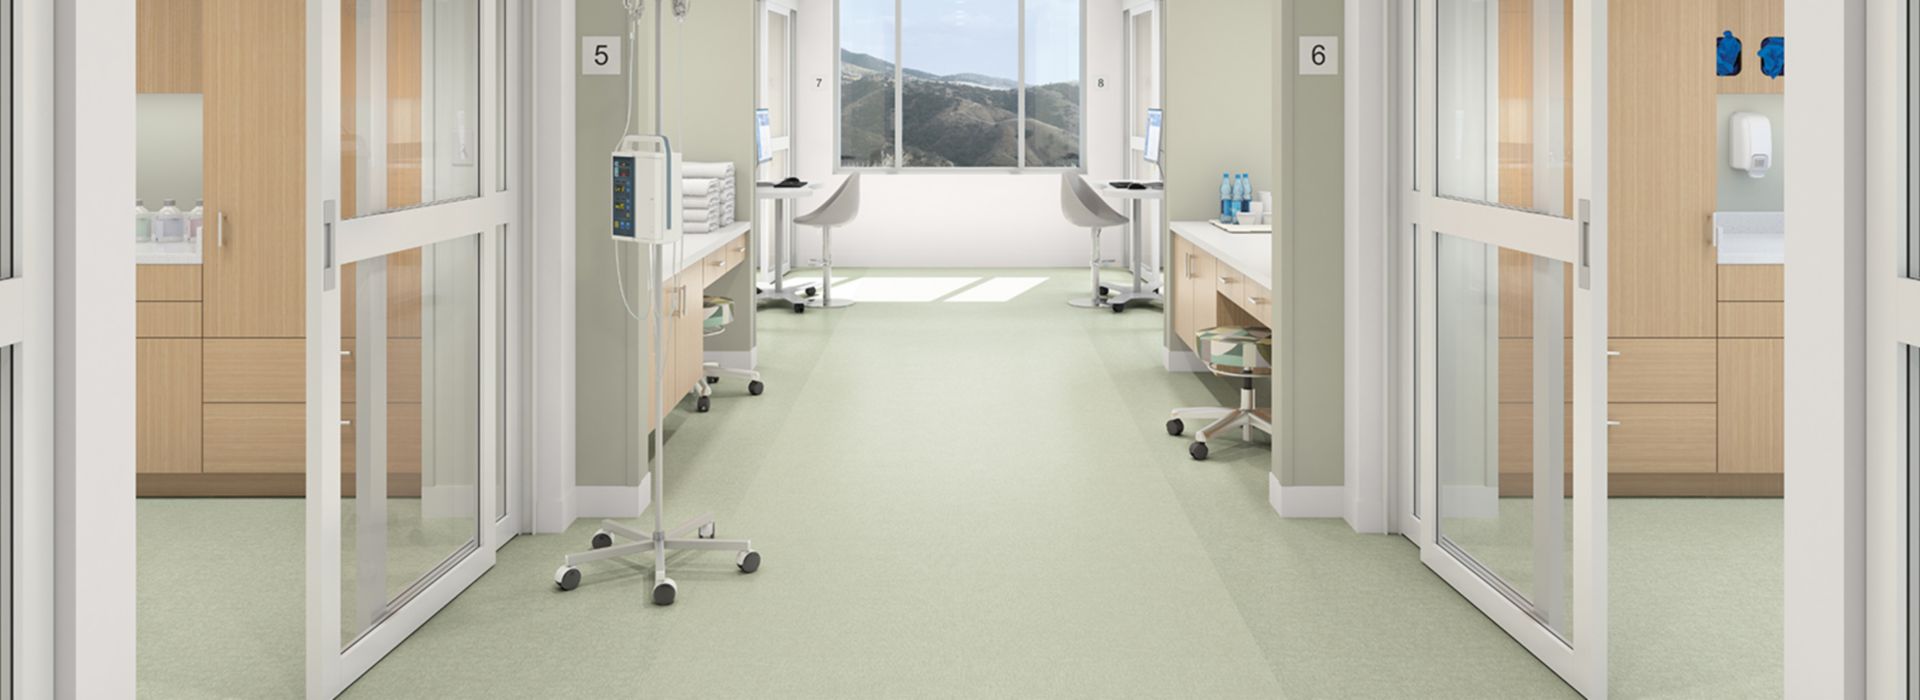 Interface Spike-tacular and Bloom with a View vinyl sheet in hospital corridor and patient rooms